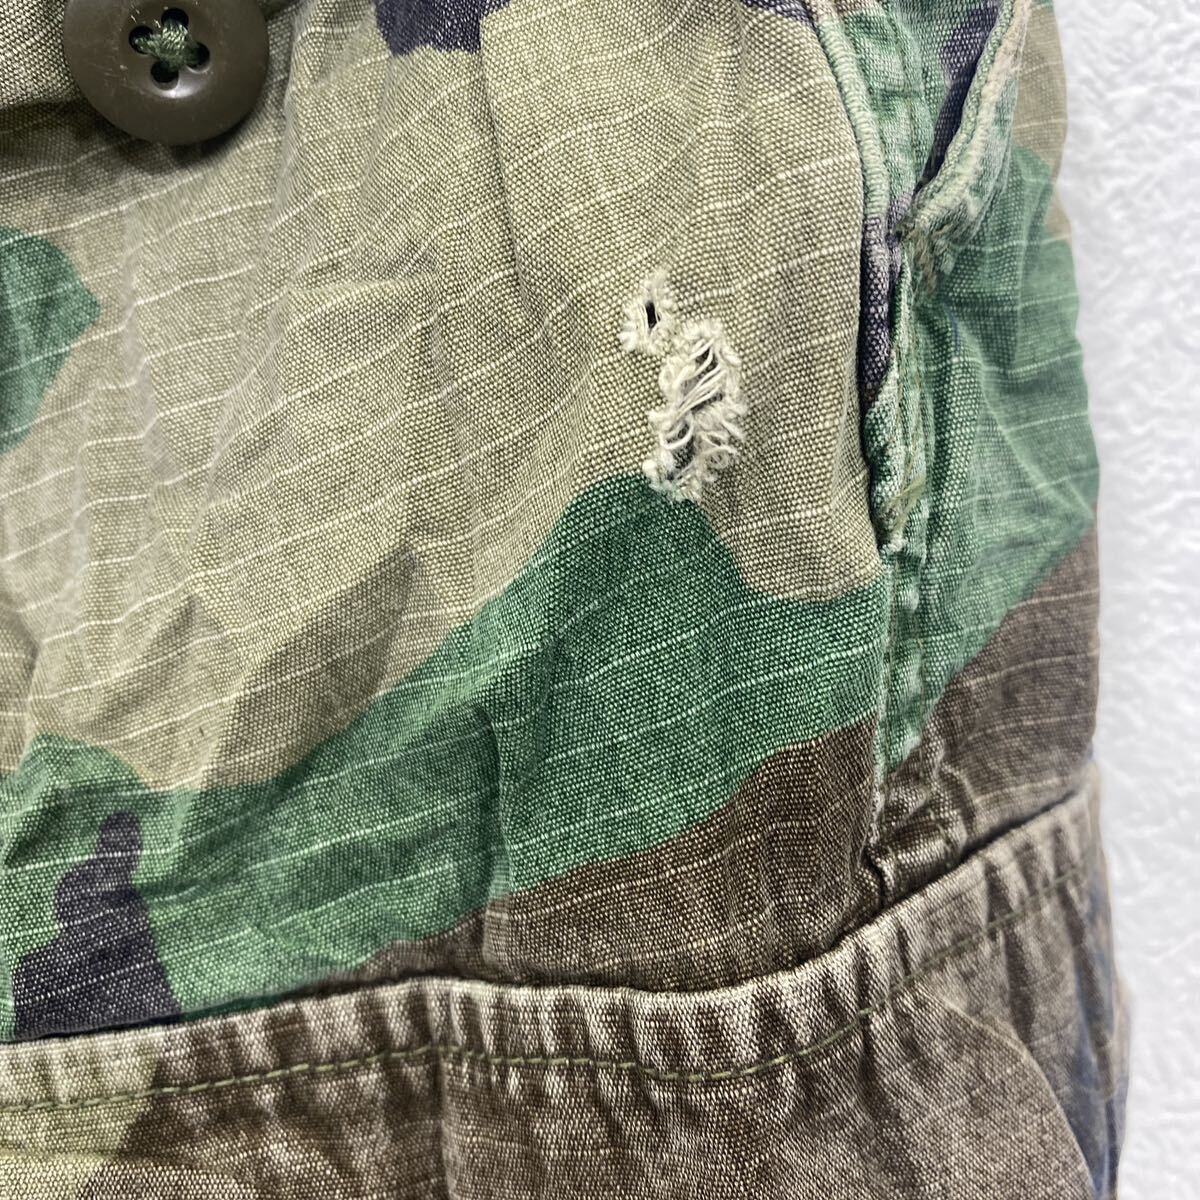  military cargo pants W31 button fly wood Land duck camouflage camouflage old clothes . America buying up 2403-1122